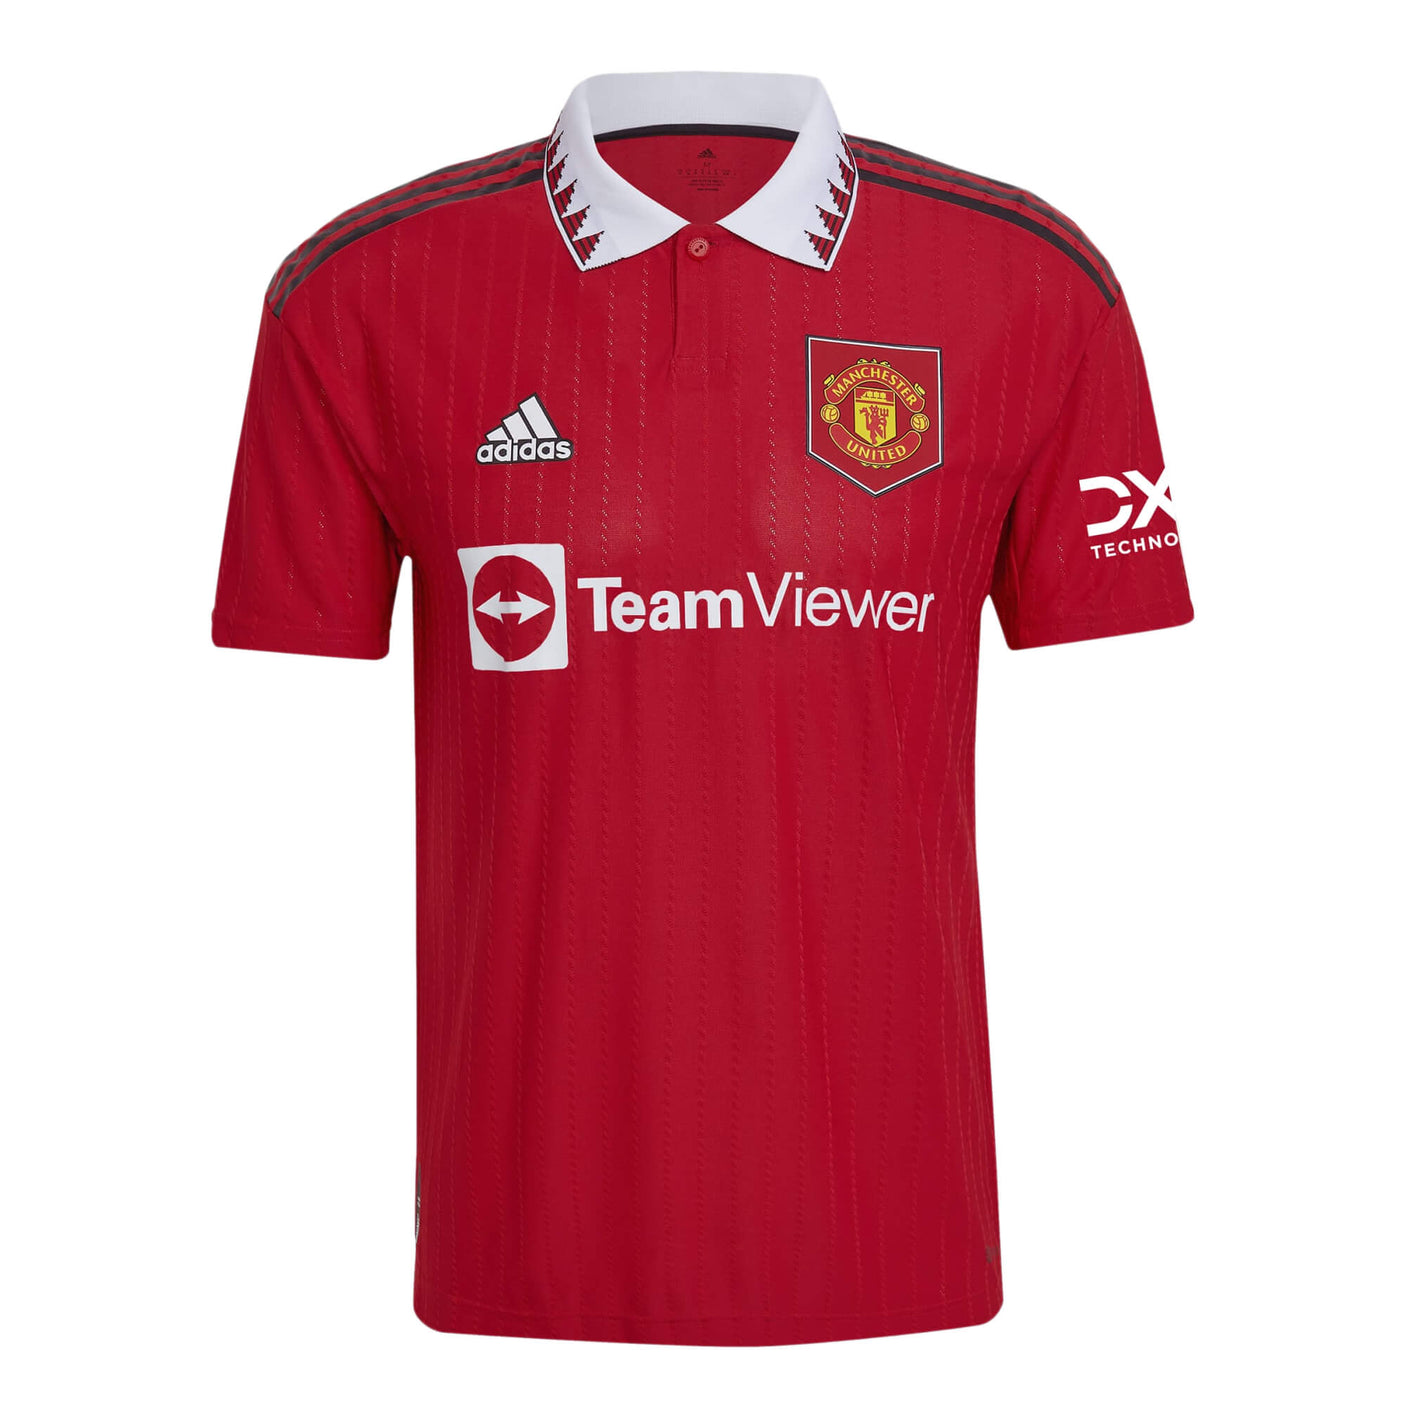 adidas Men's Manchester United 2022/23 Home Jersey Red/White/Black 